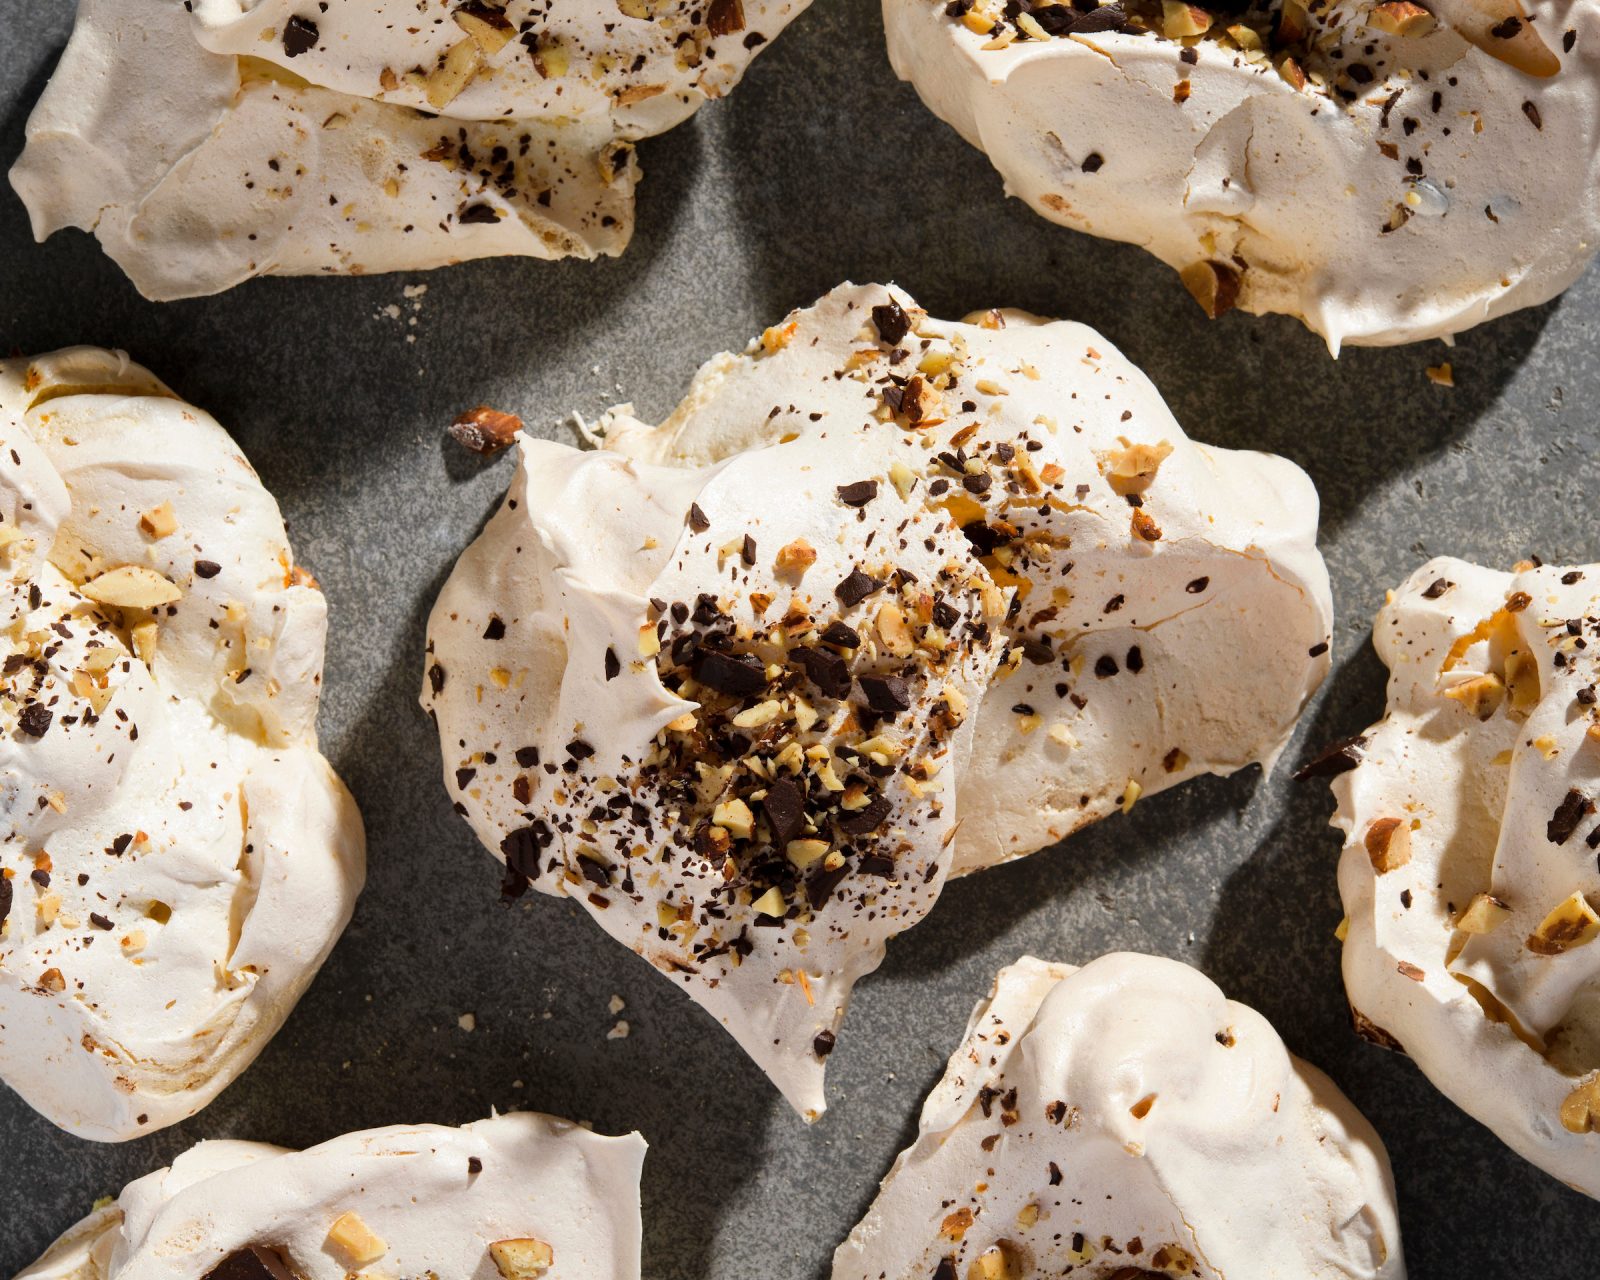 Meringue Cookies with Salted Peanuts and Chocolate - Cook What You Have, Milk Street